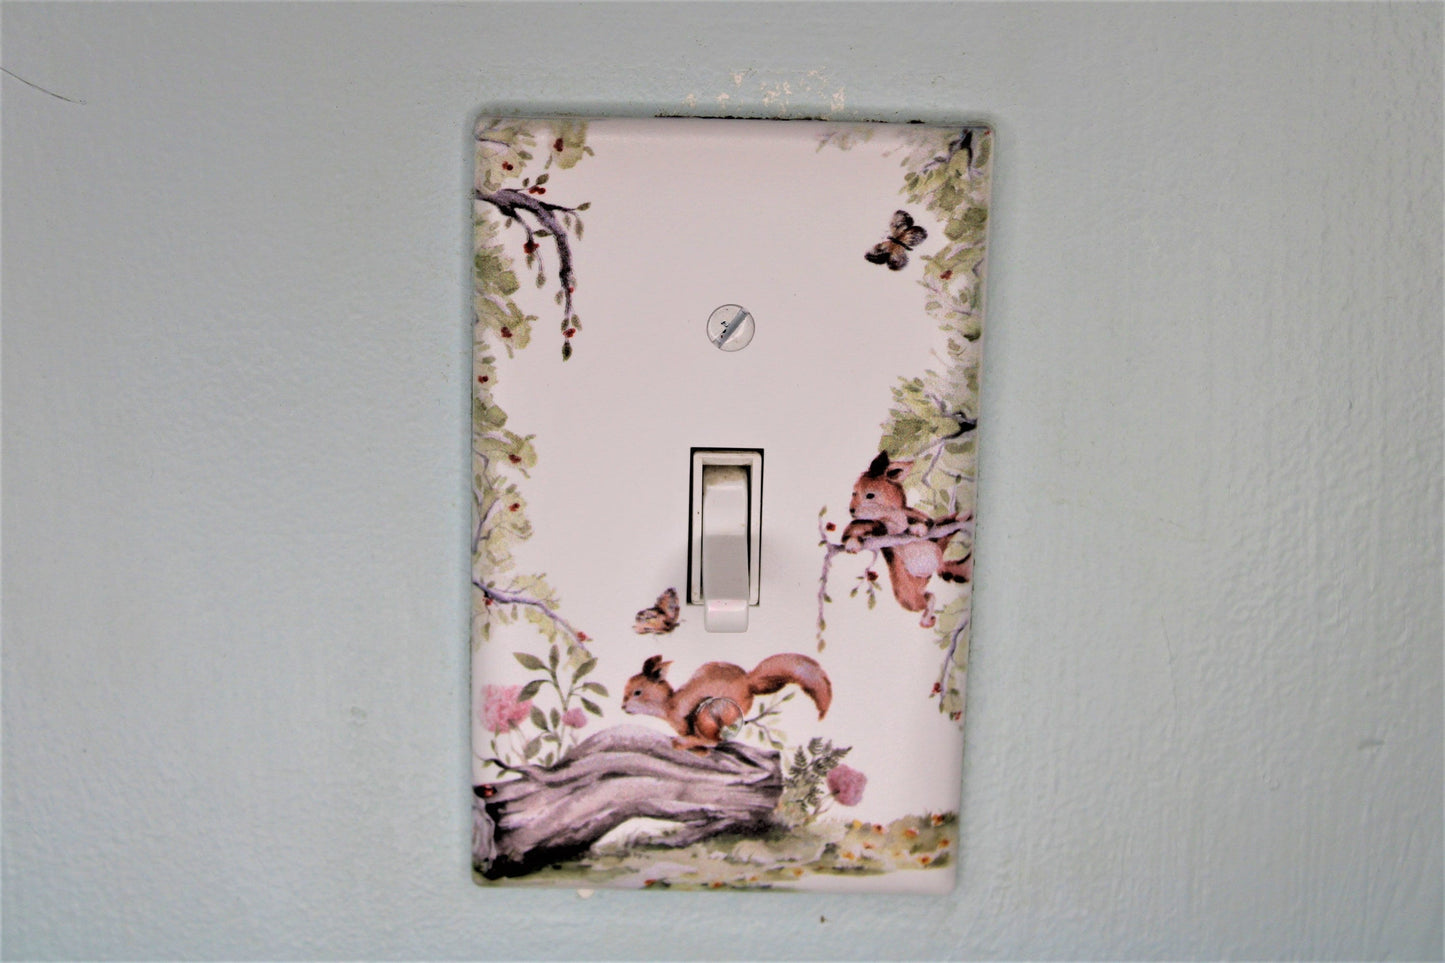 squirrel playing in tree custom printed painted Light switch cover plate for nursery